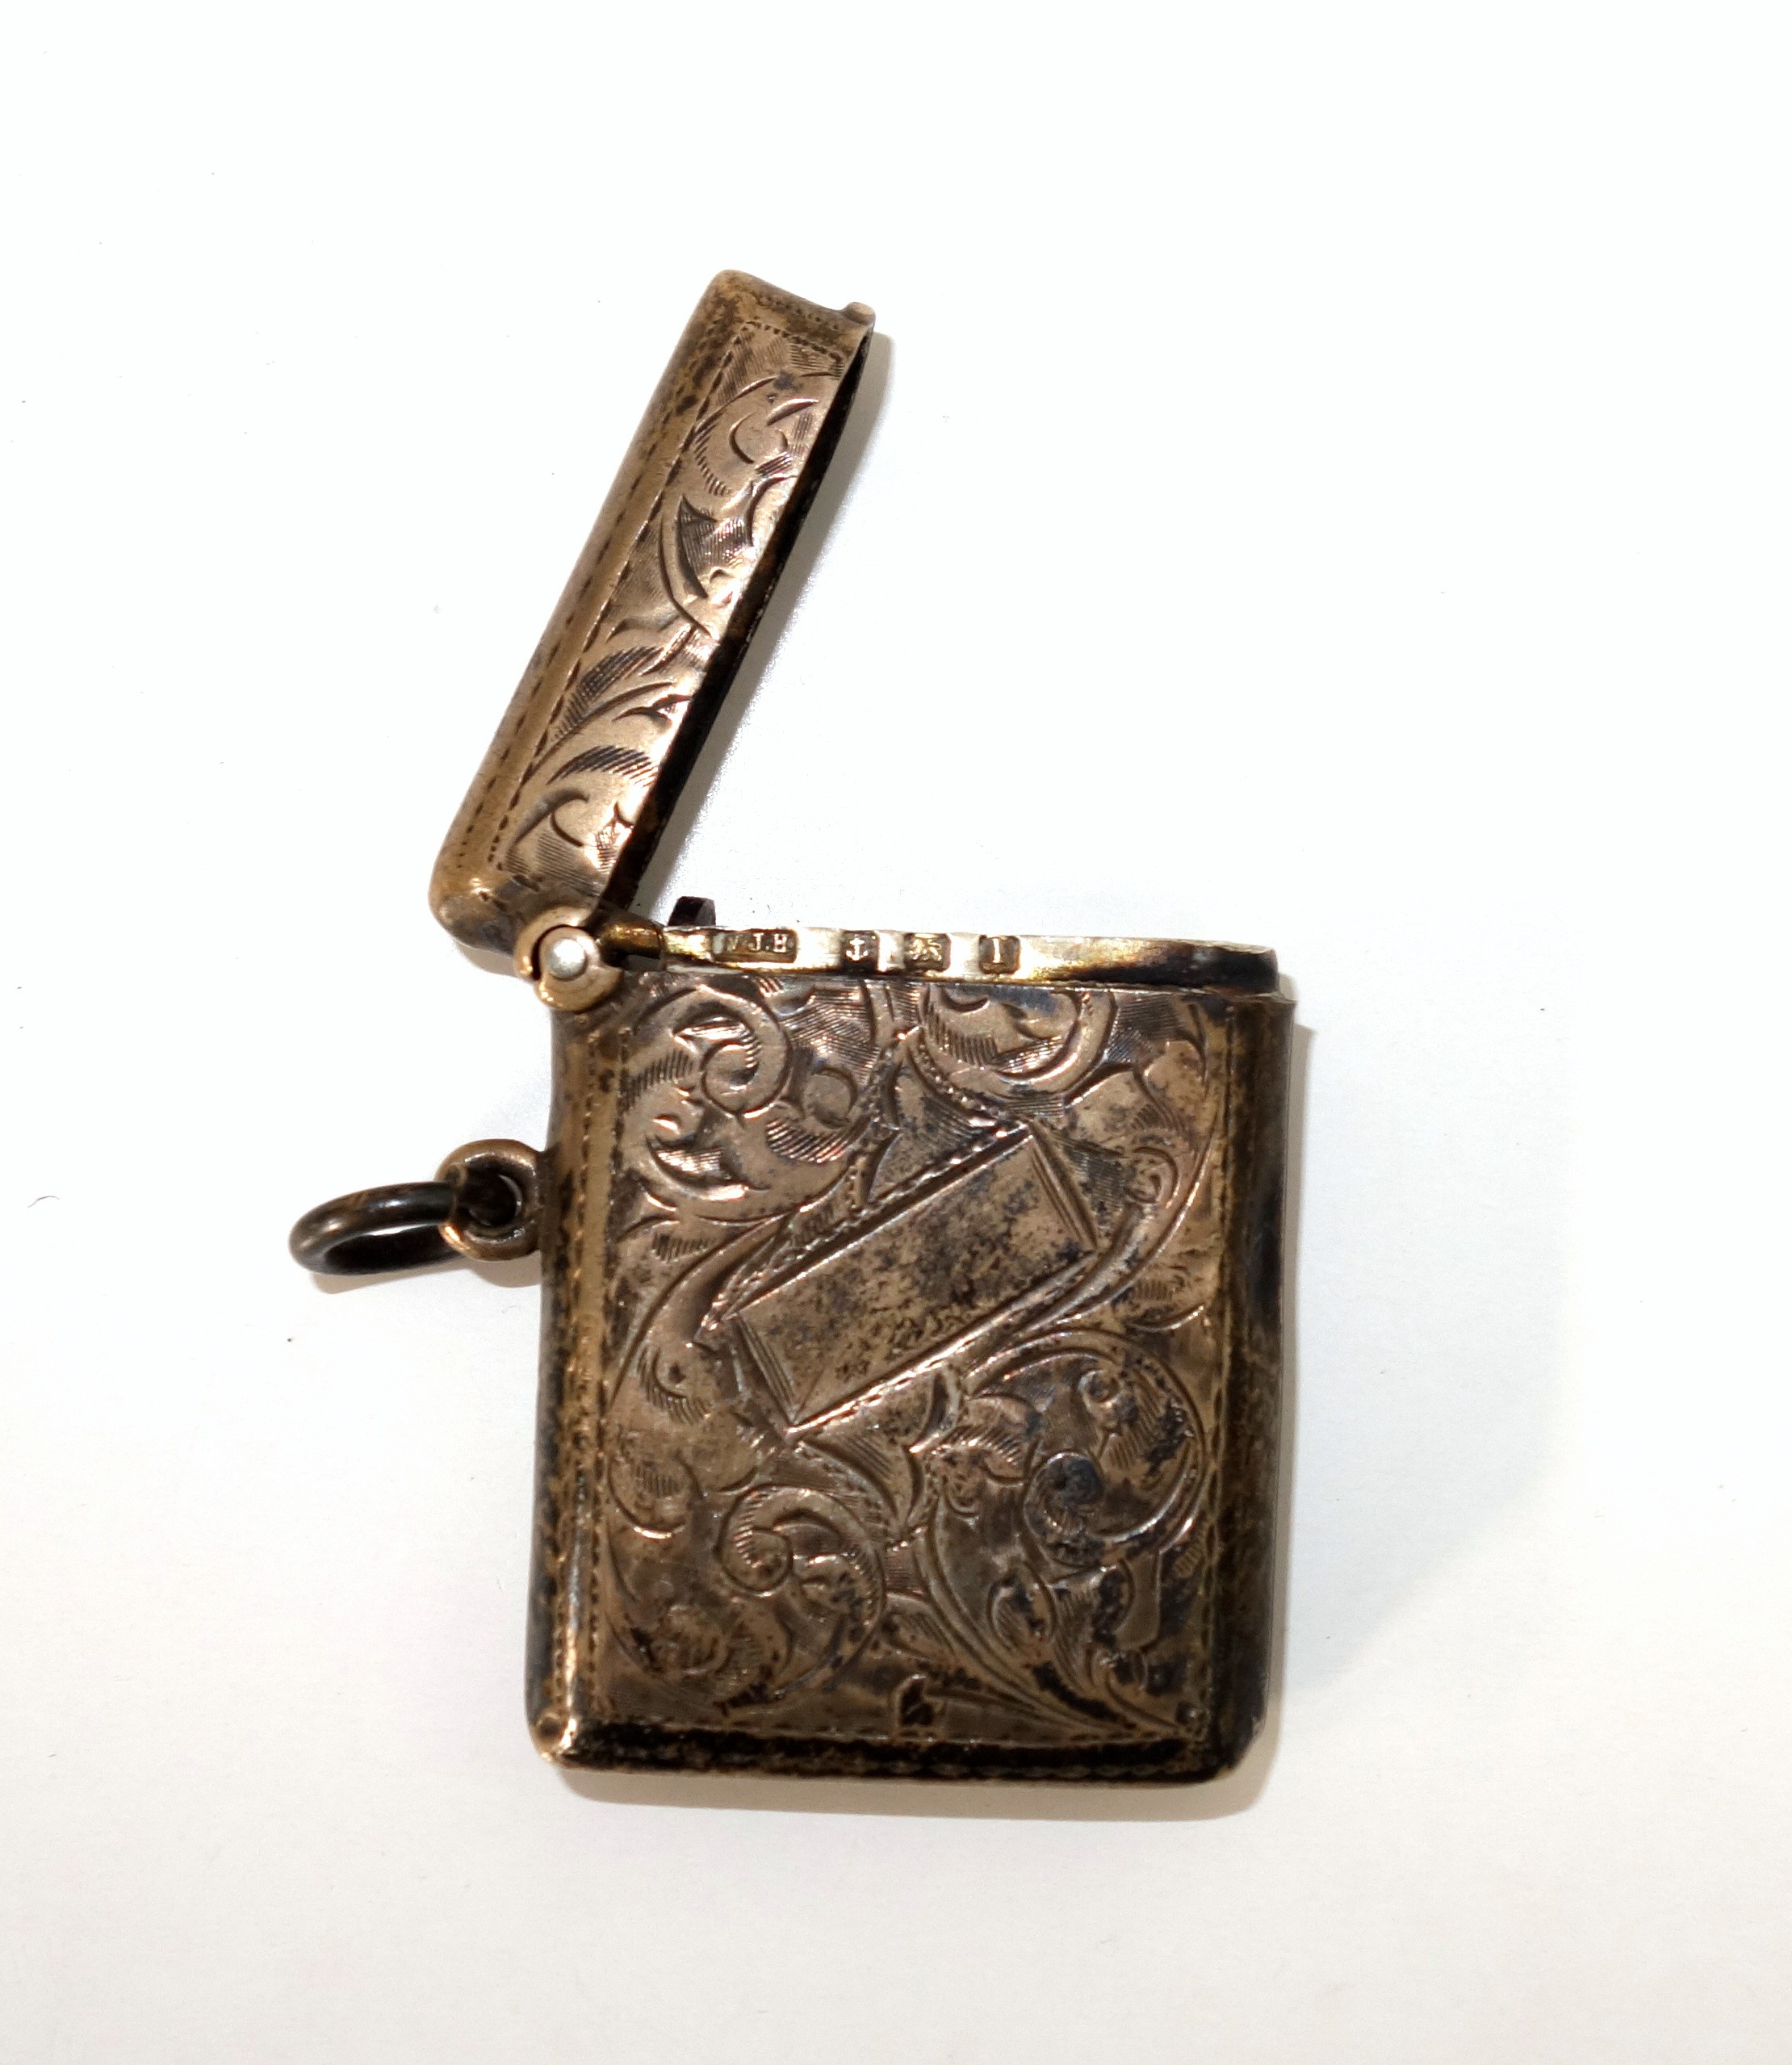 Edwardian silver vesta case with all-over chased scrolling decoration and vacant cartouche, by V J - Image 4 of 4